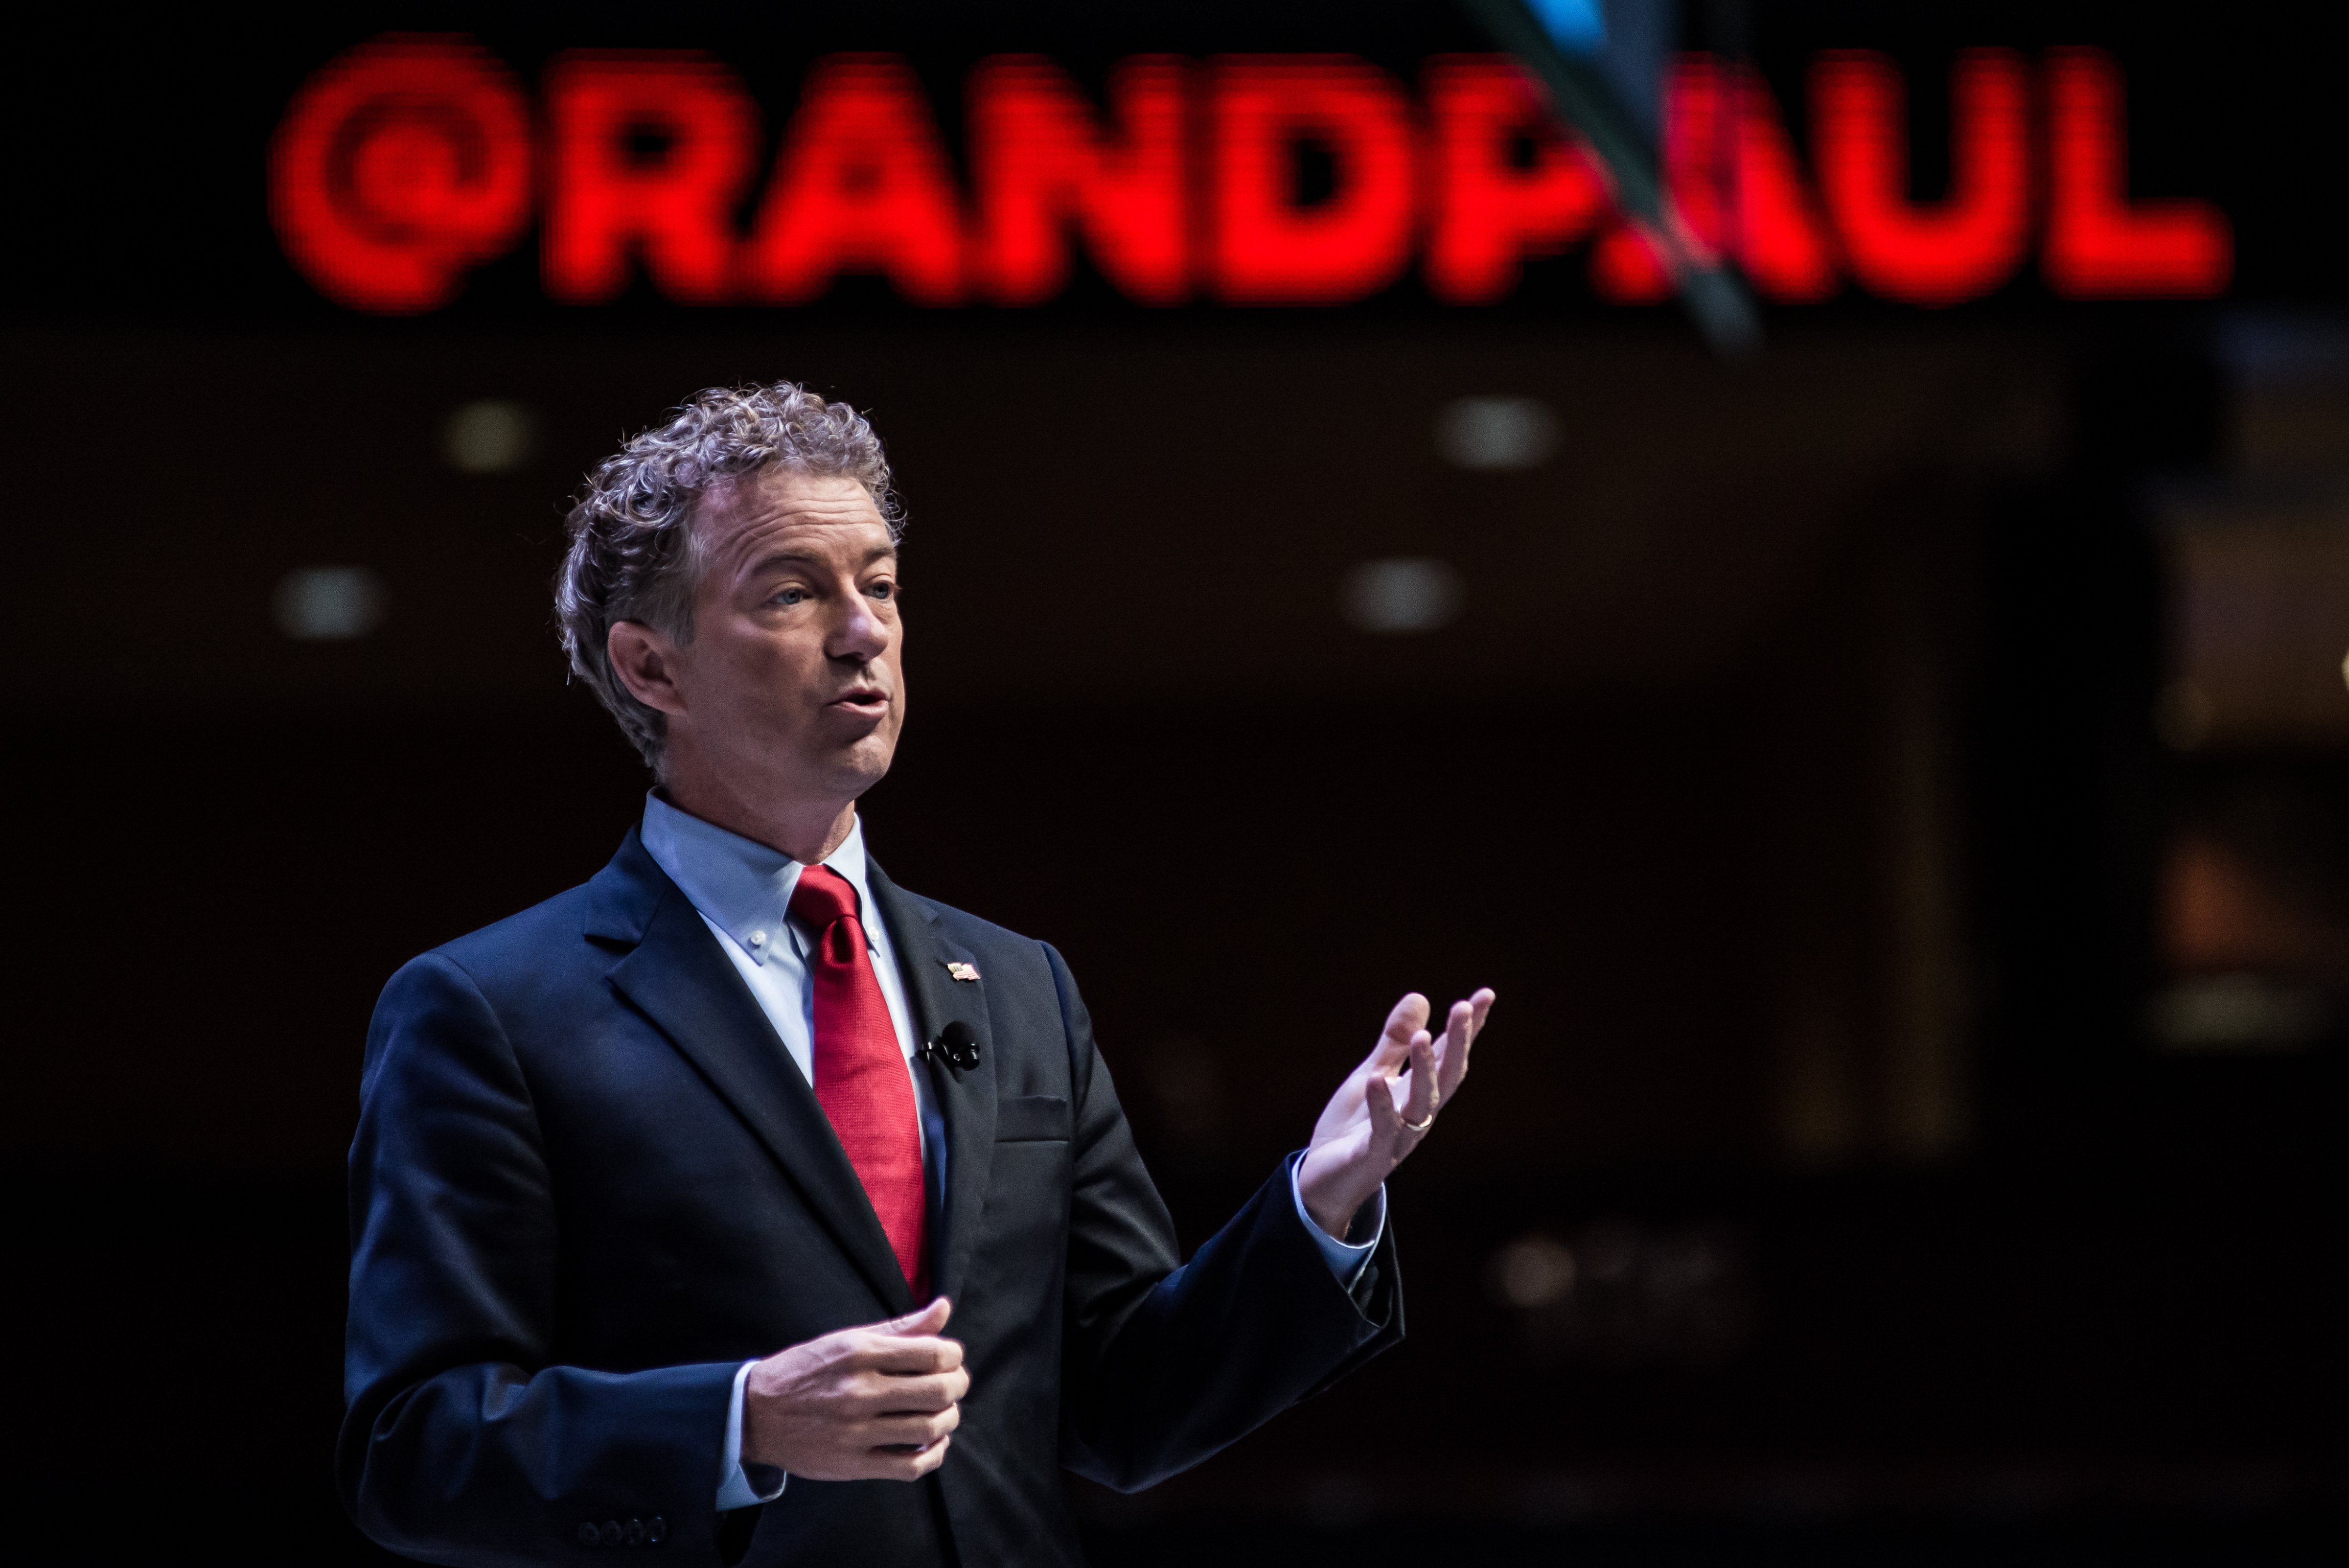 U.S. Sen. Rand Paul (R-KY) speaks to voters at the Heritage Action Presidential Candidate Forum in Greenville, S.C. on Sept. 18, 2015. (Sean Rayford—Getty Images)